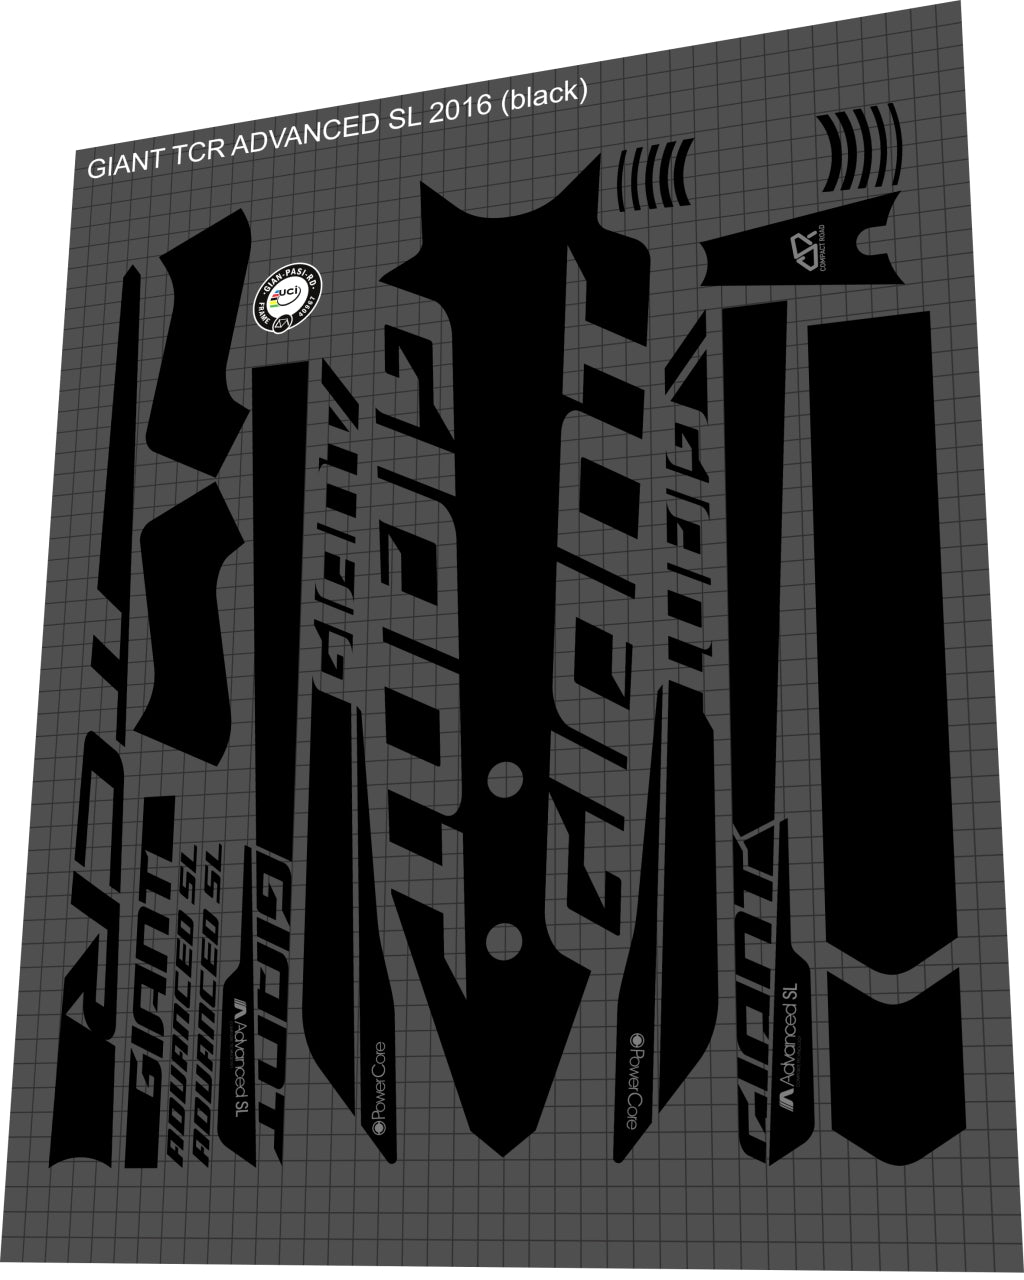 GIANT TCR (2016-2019) Advanced SL Frame Decal Set - Bike Decal Replace